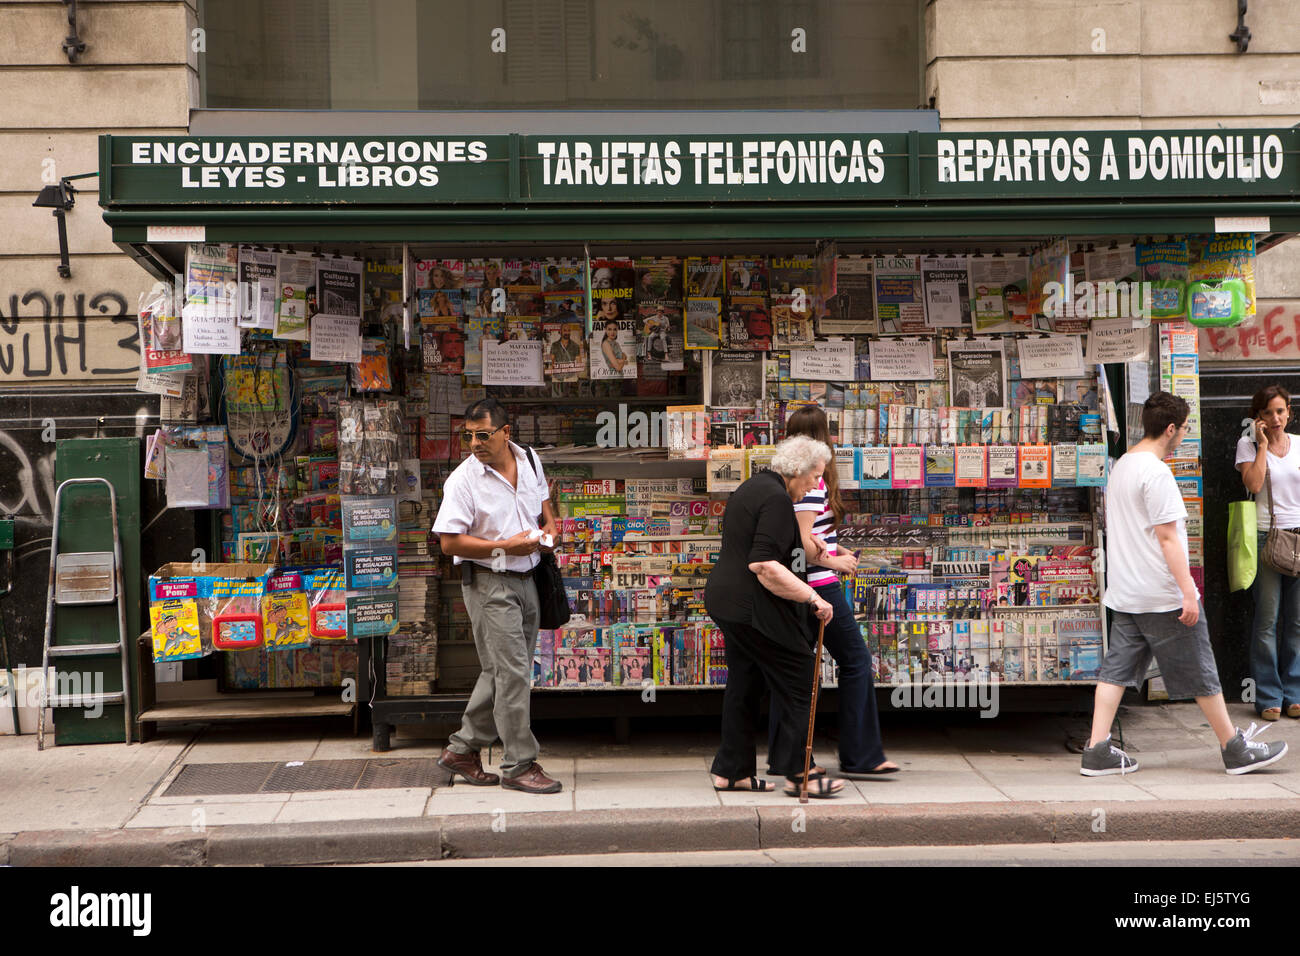 Argentina, Buenos Aires, Retiro, news vendor, many double as illegal currency exchange booths Stock Photo